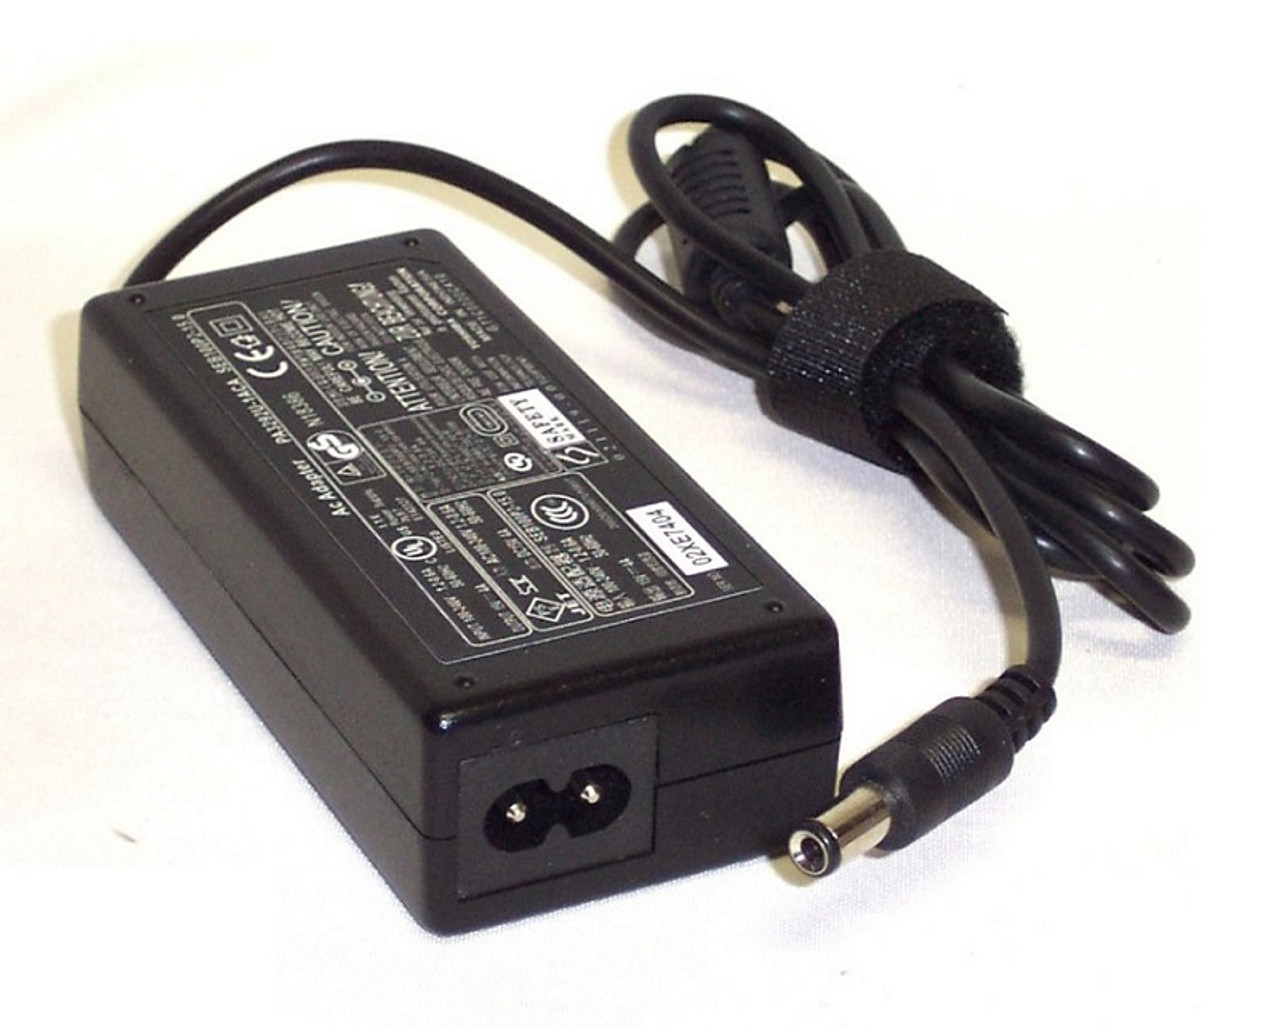 R940P - Dell 150Watt 3 Prong AC Adapter with 6ft Power Cord for Alienware M15x Laptop